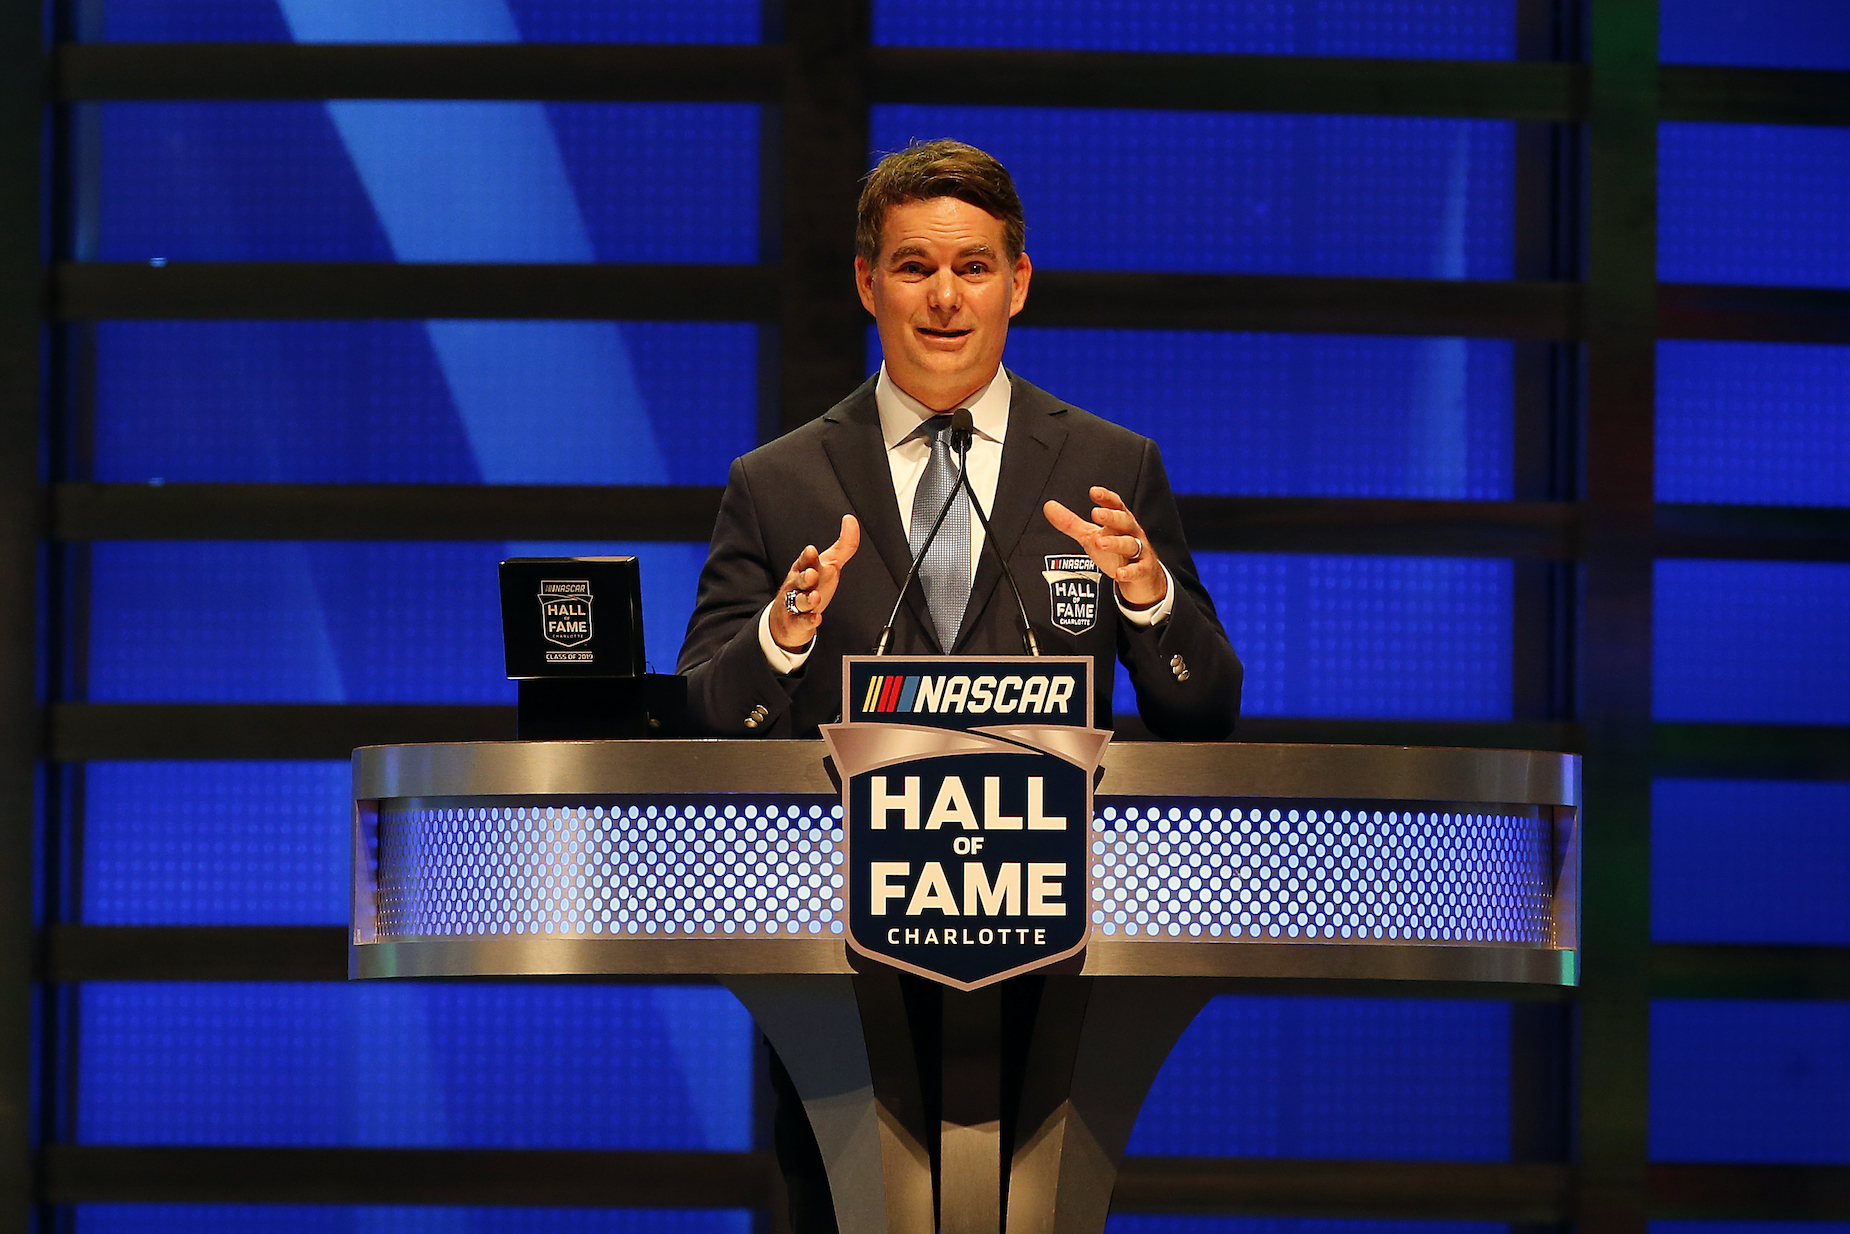 Jeff Gordon gives a speech during his induction into the NASCAR Hall of Fame.